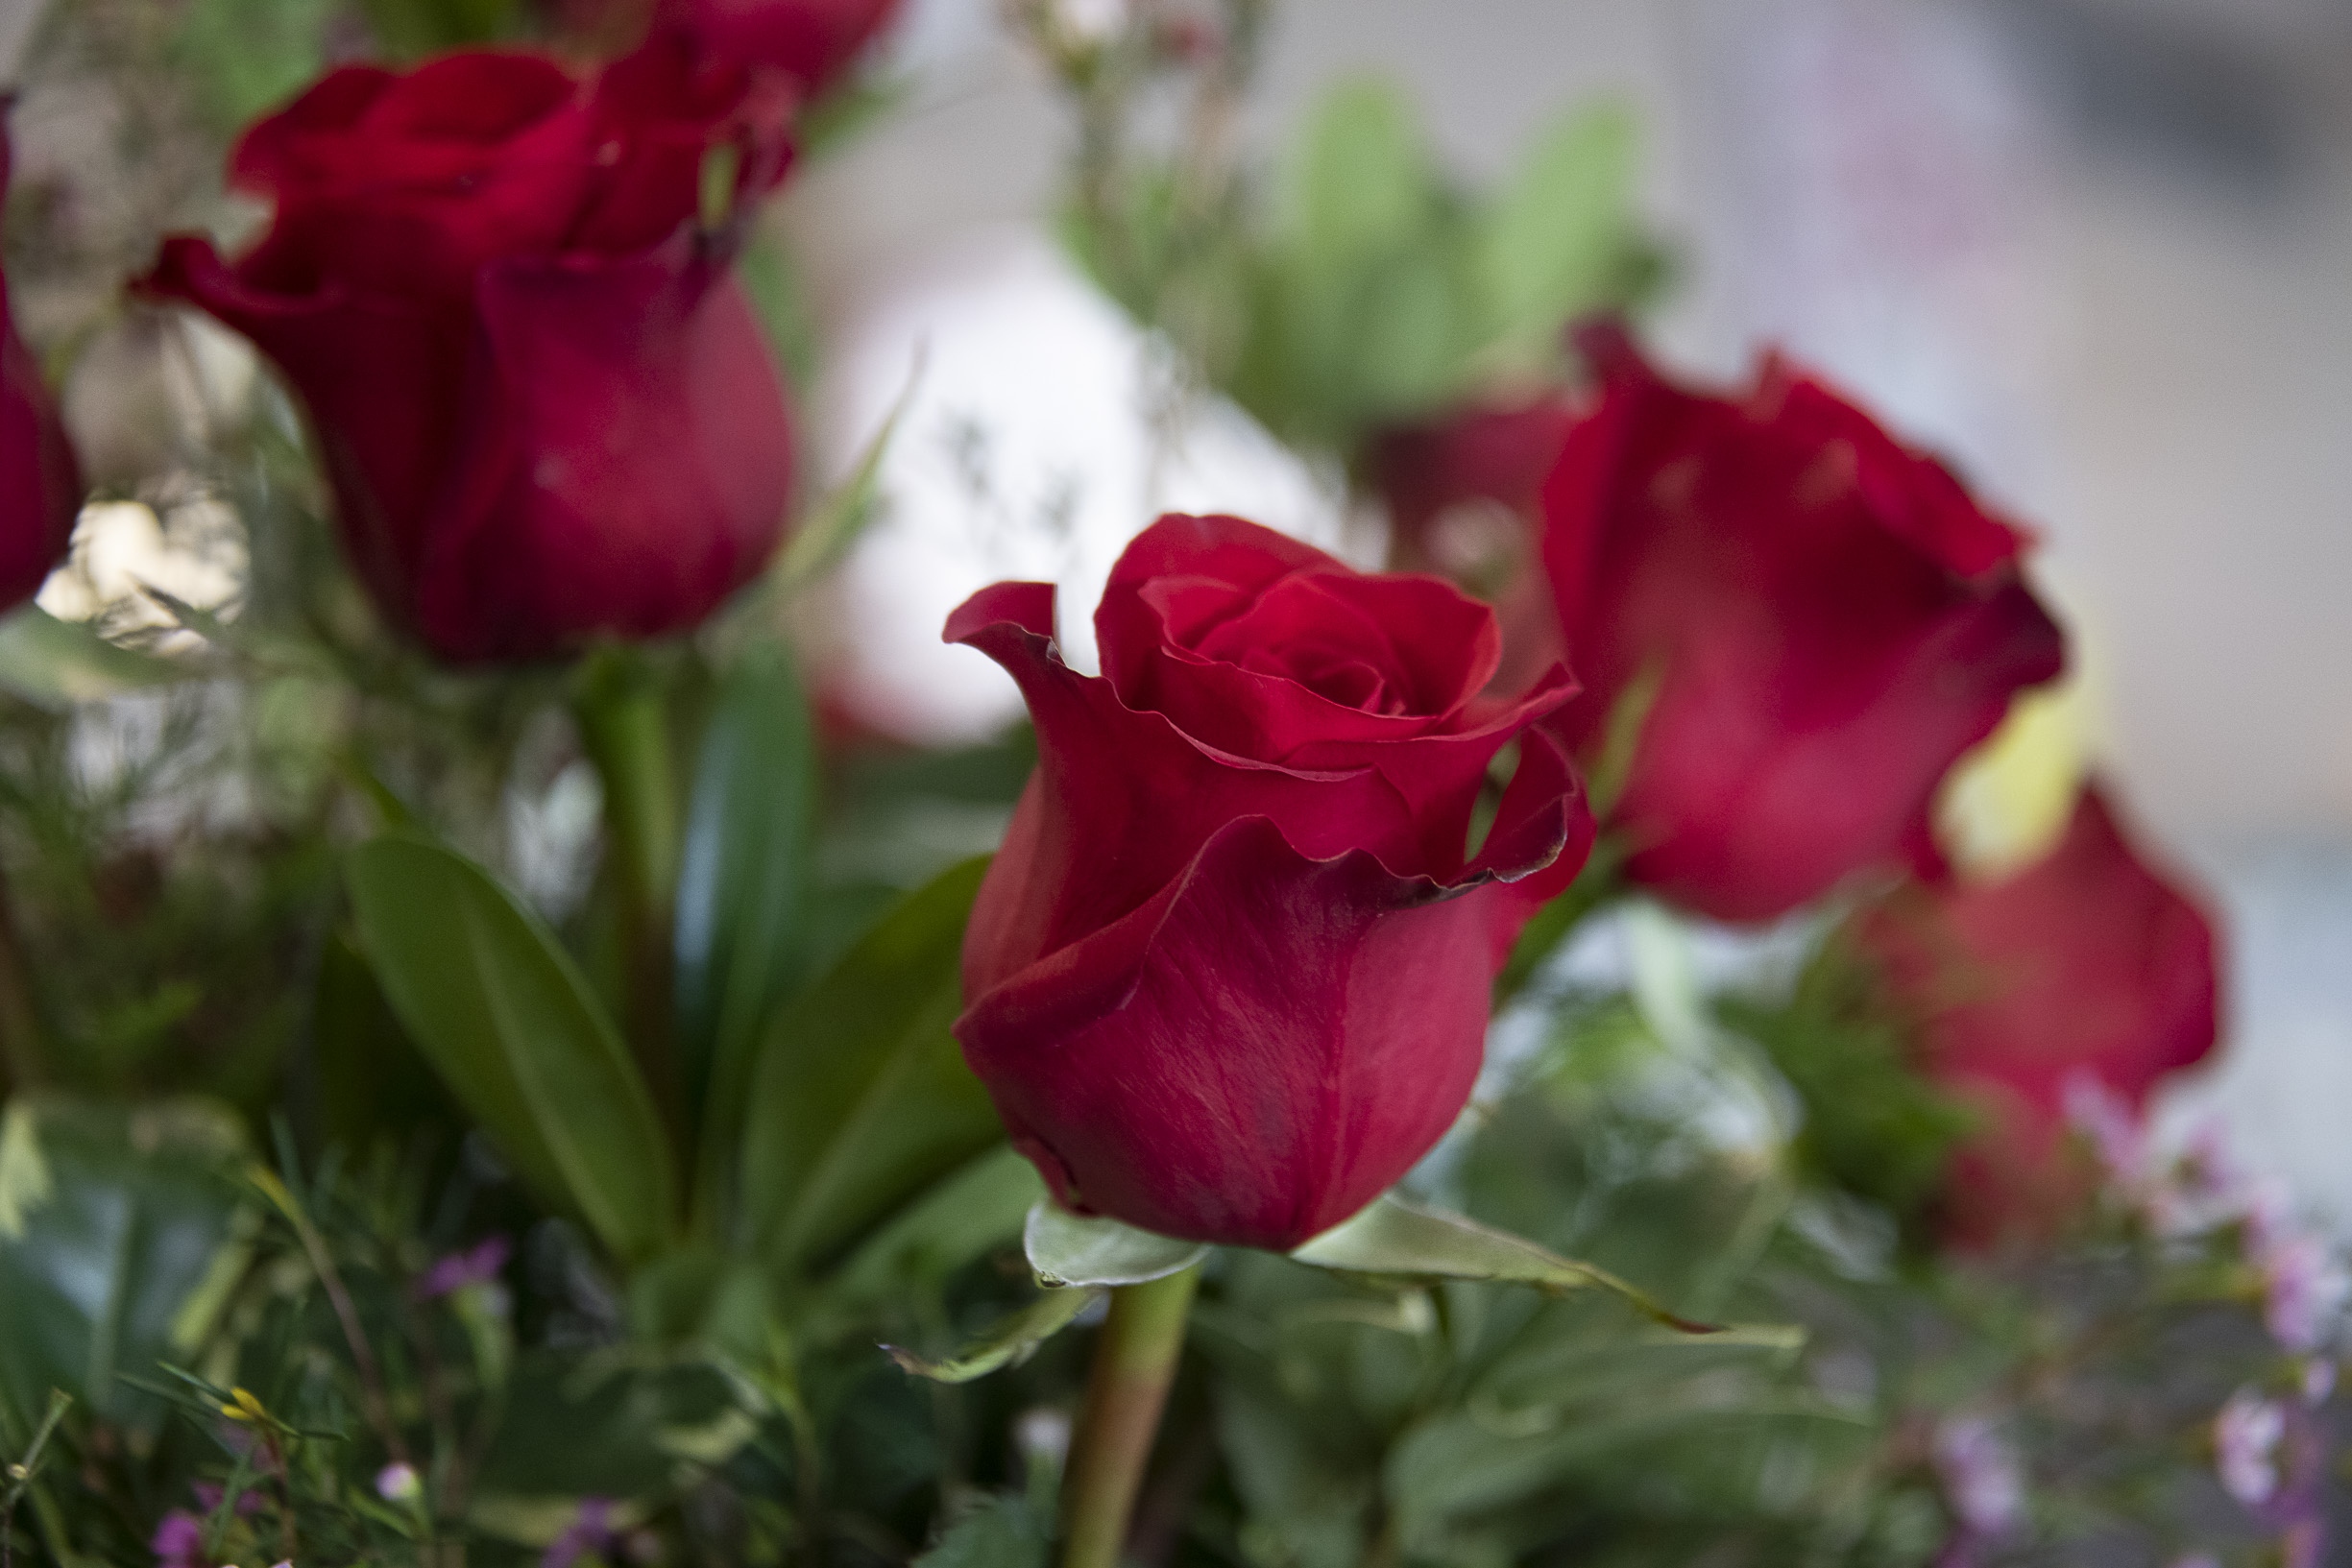 Valentine's Day Red Roses